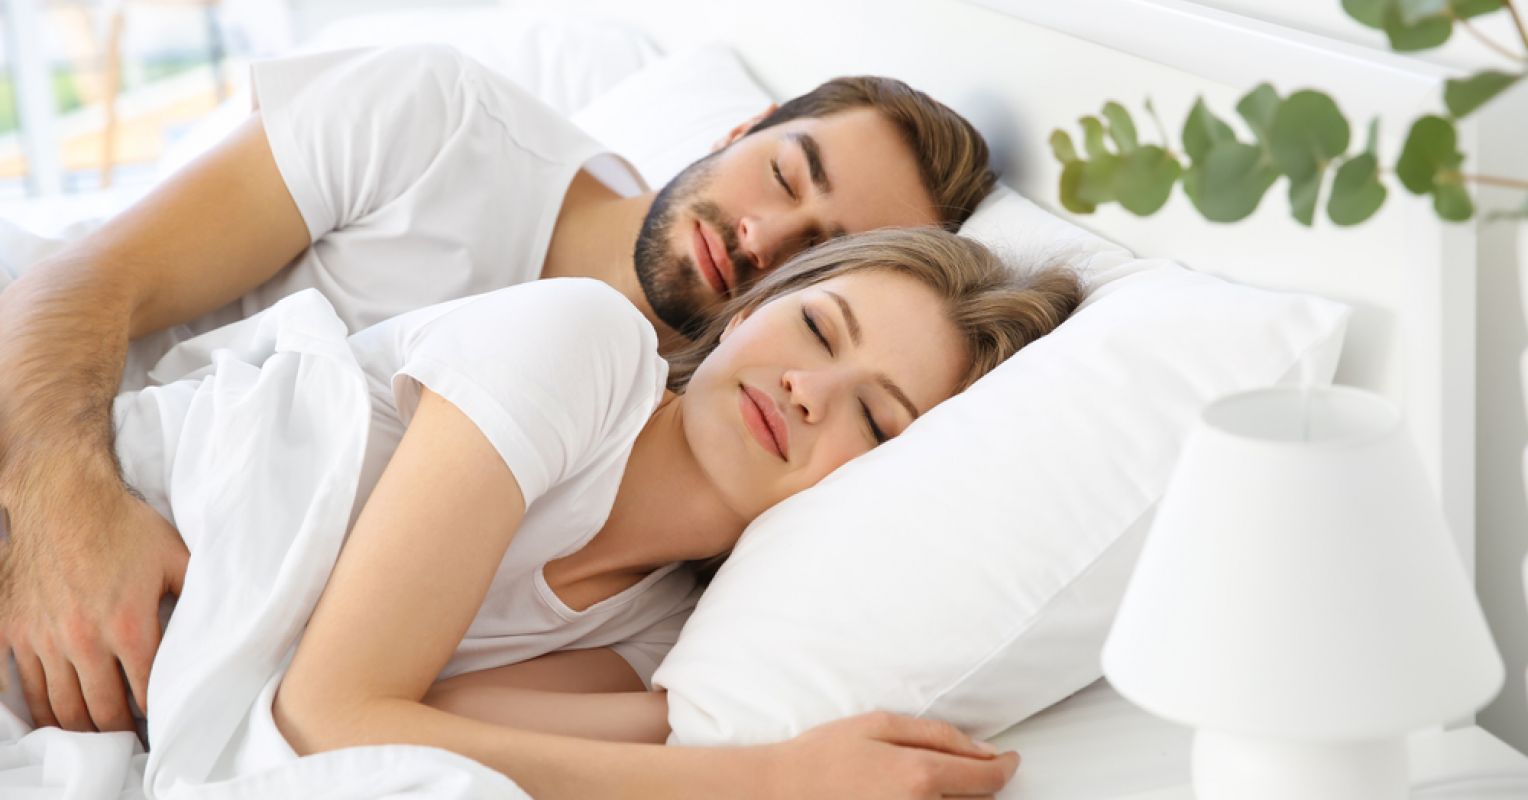 The Significant Benefits Of Sleeping Next To A Partner Psychology Today United Kingdom